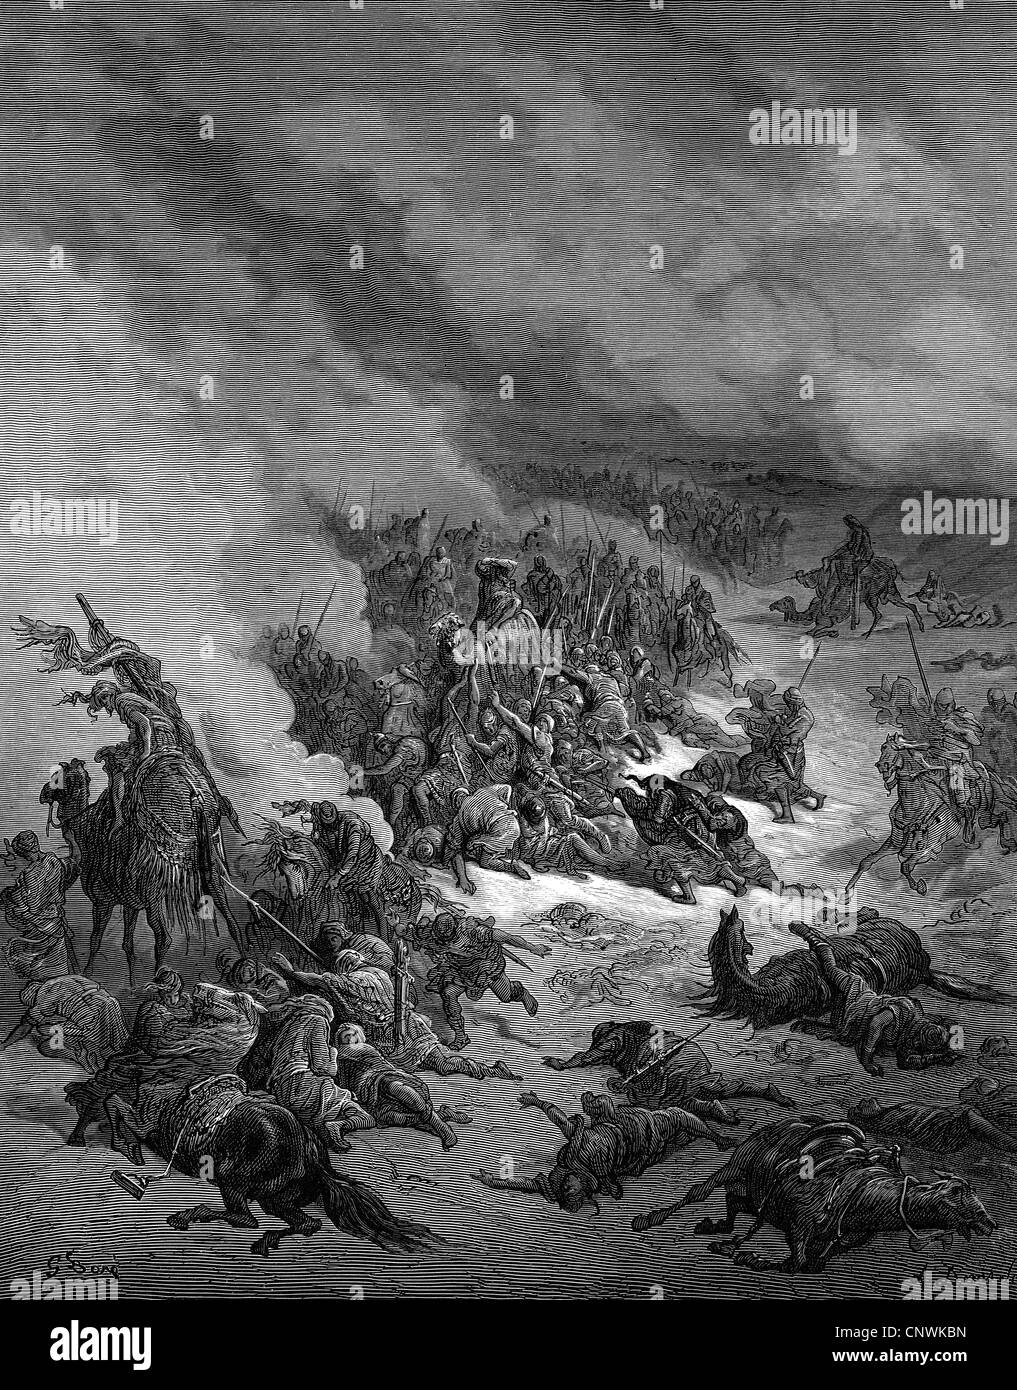 Middle Ages, crusades, Battle of Montgisard, 25.11.1177, the Syrian army in the storm, wood engraving by G. Sorg after drawing by Gustav Dore, 'Histoire des croisades' by Joseph Francois Michaud, 1875, Artist's Copyright has not to be cleared Stock Photo